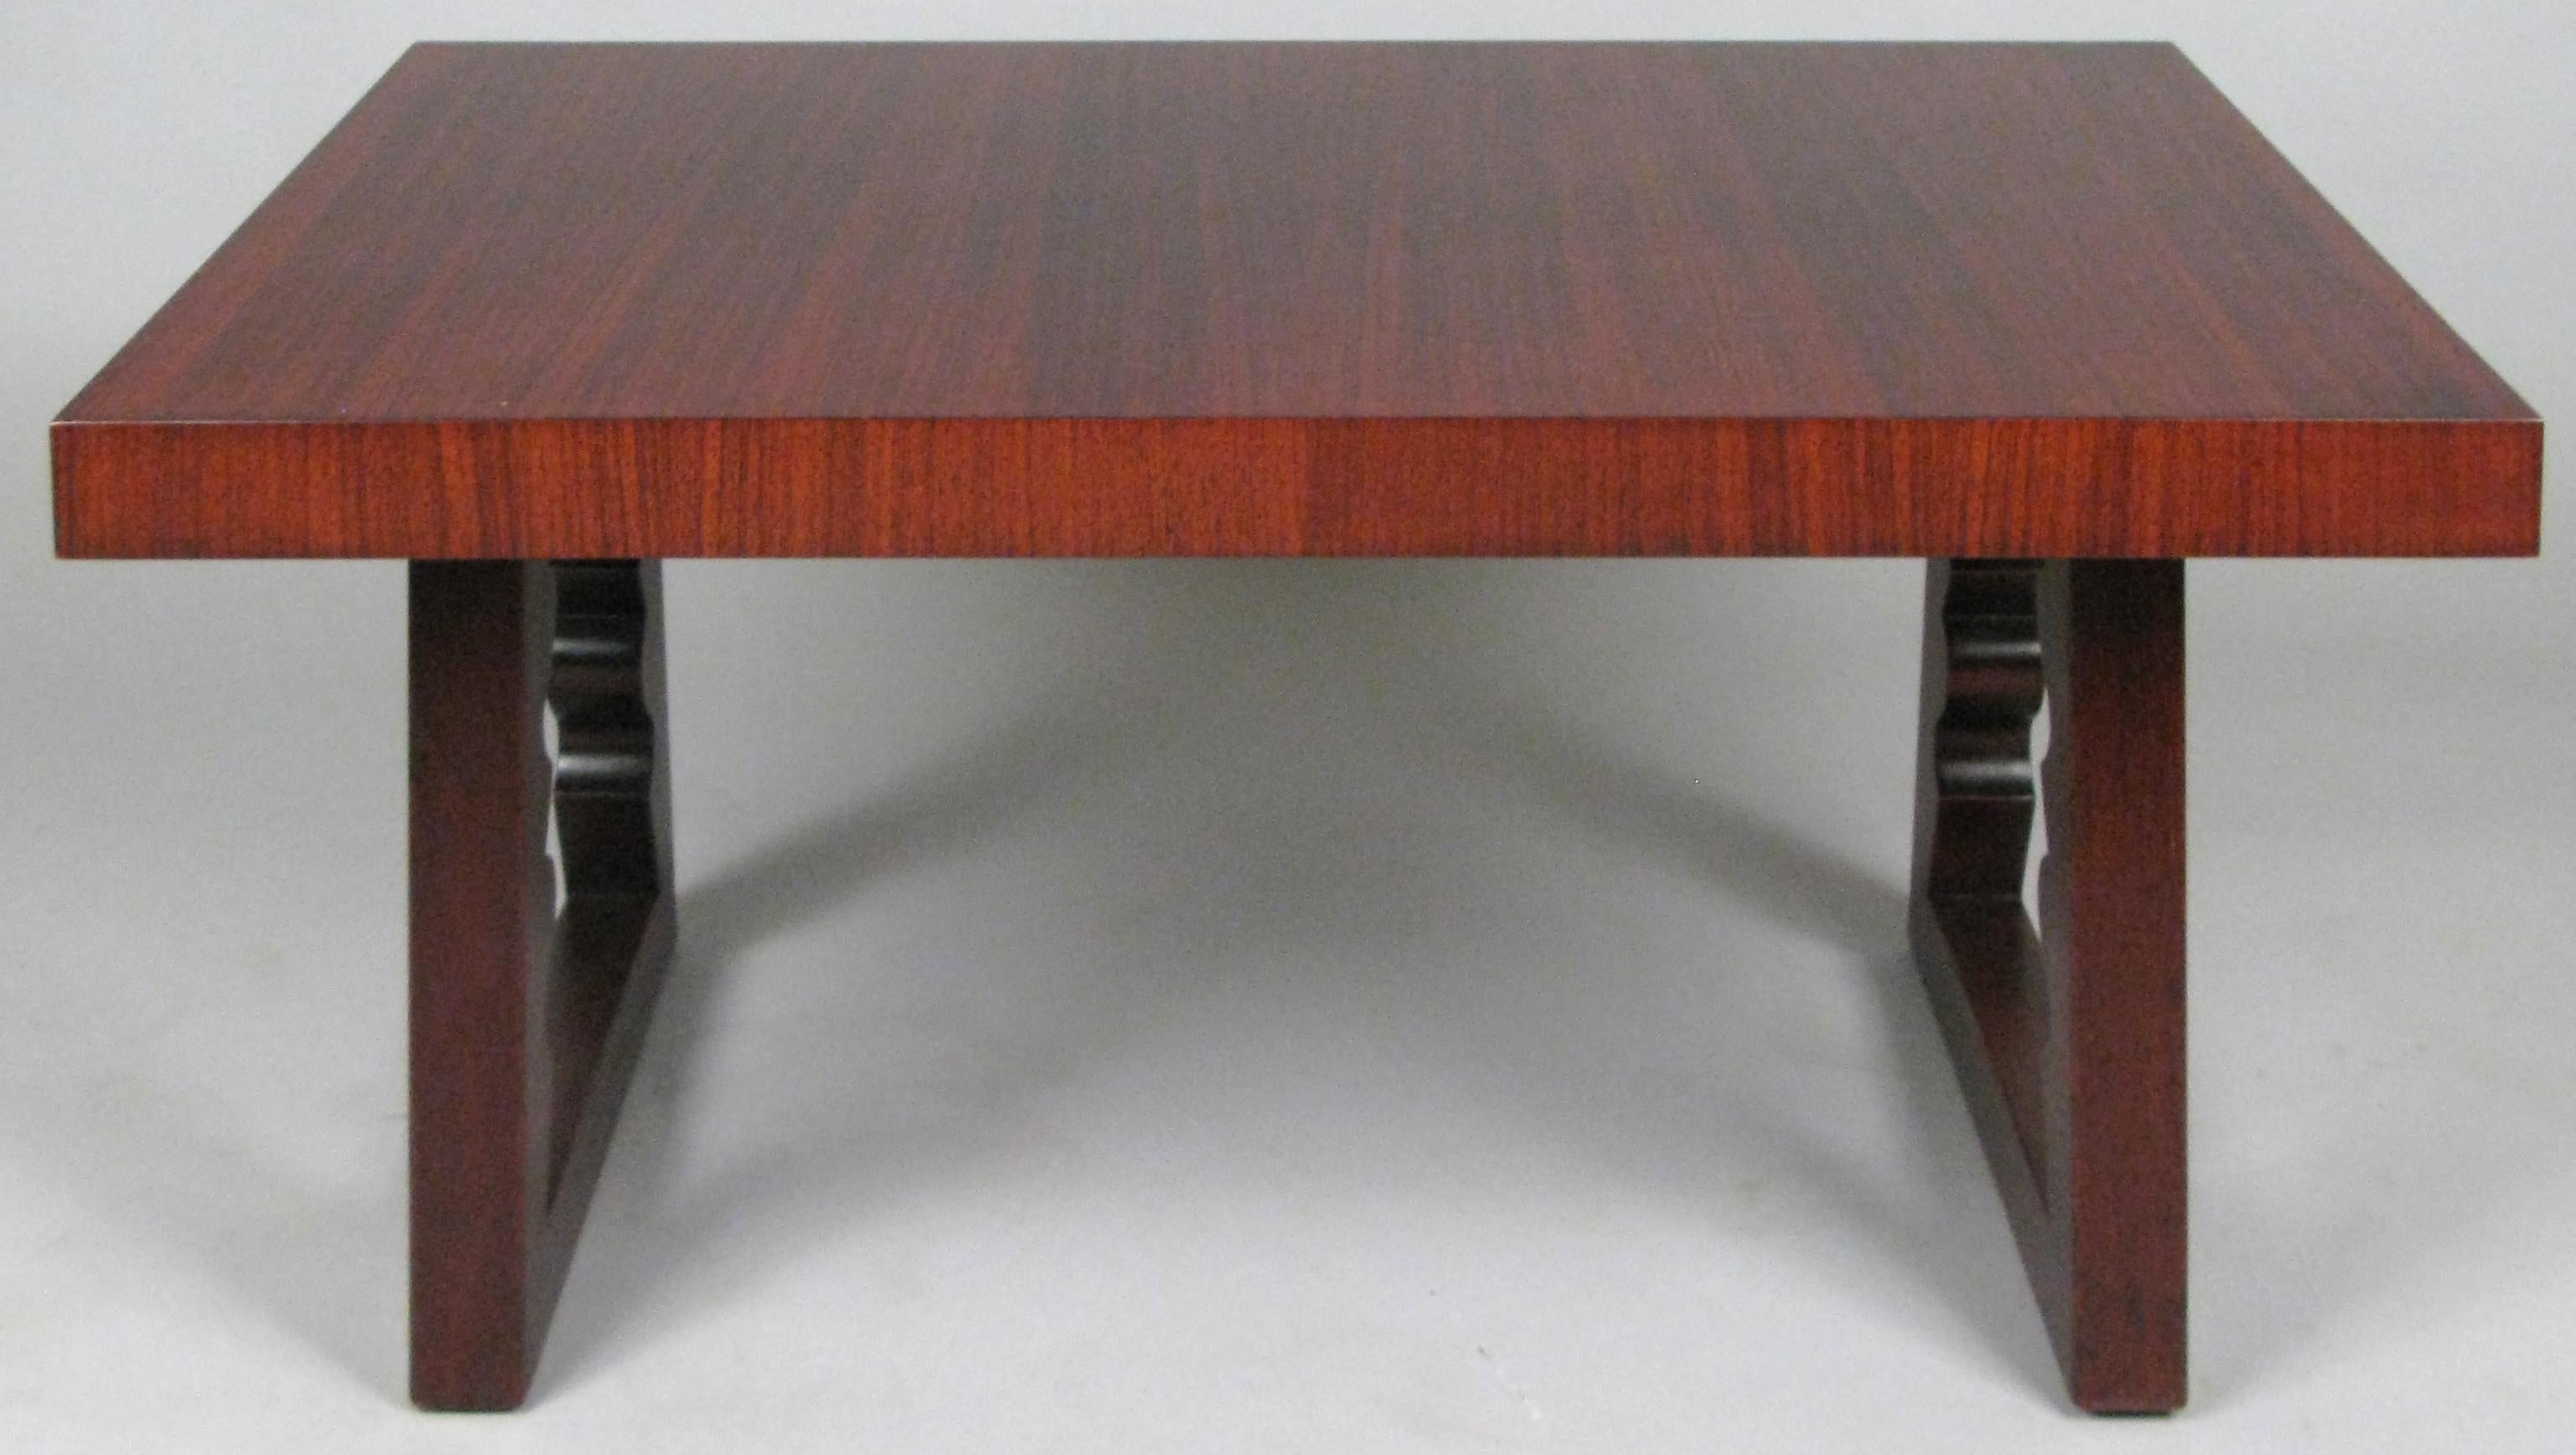 A beautifully detailed rosewood coffee table designed by Andrew Szoeke, circa 1948. With a rectangular top and mahogany bases with sculpted details on the interior of the legs. Gorgeous rosewood graining.